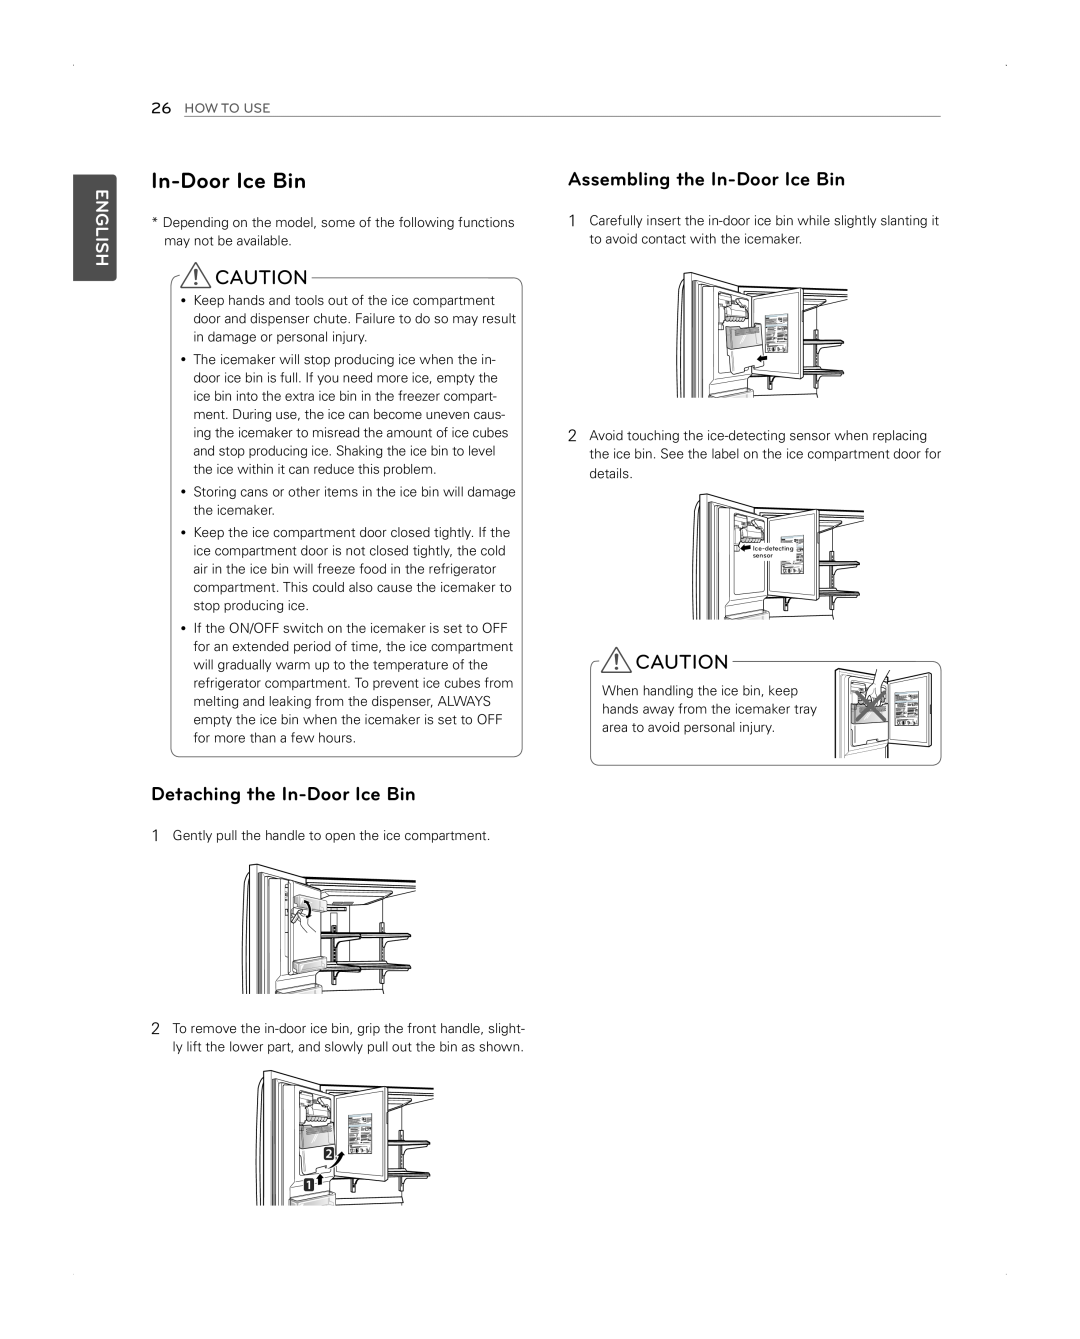 LG Electronics LFX31945ST Assembling the In-Door Ice Bin, Detaching the In-Door Ice Bin, English, How To Use 